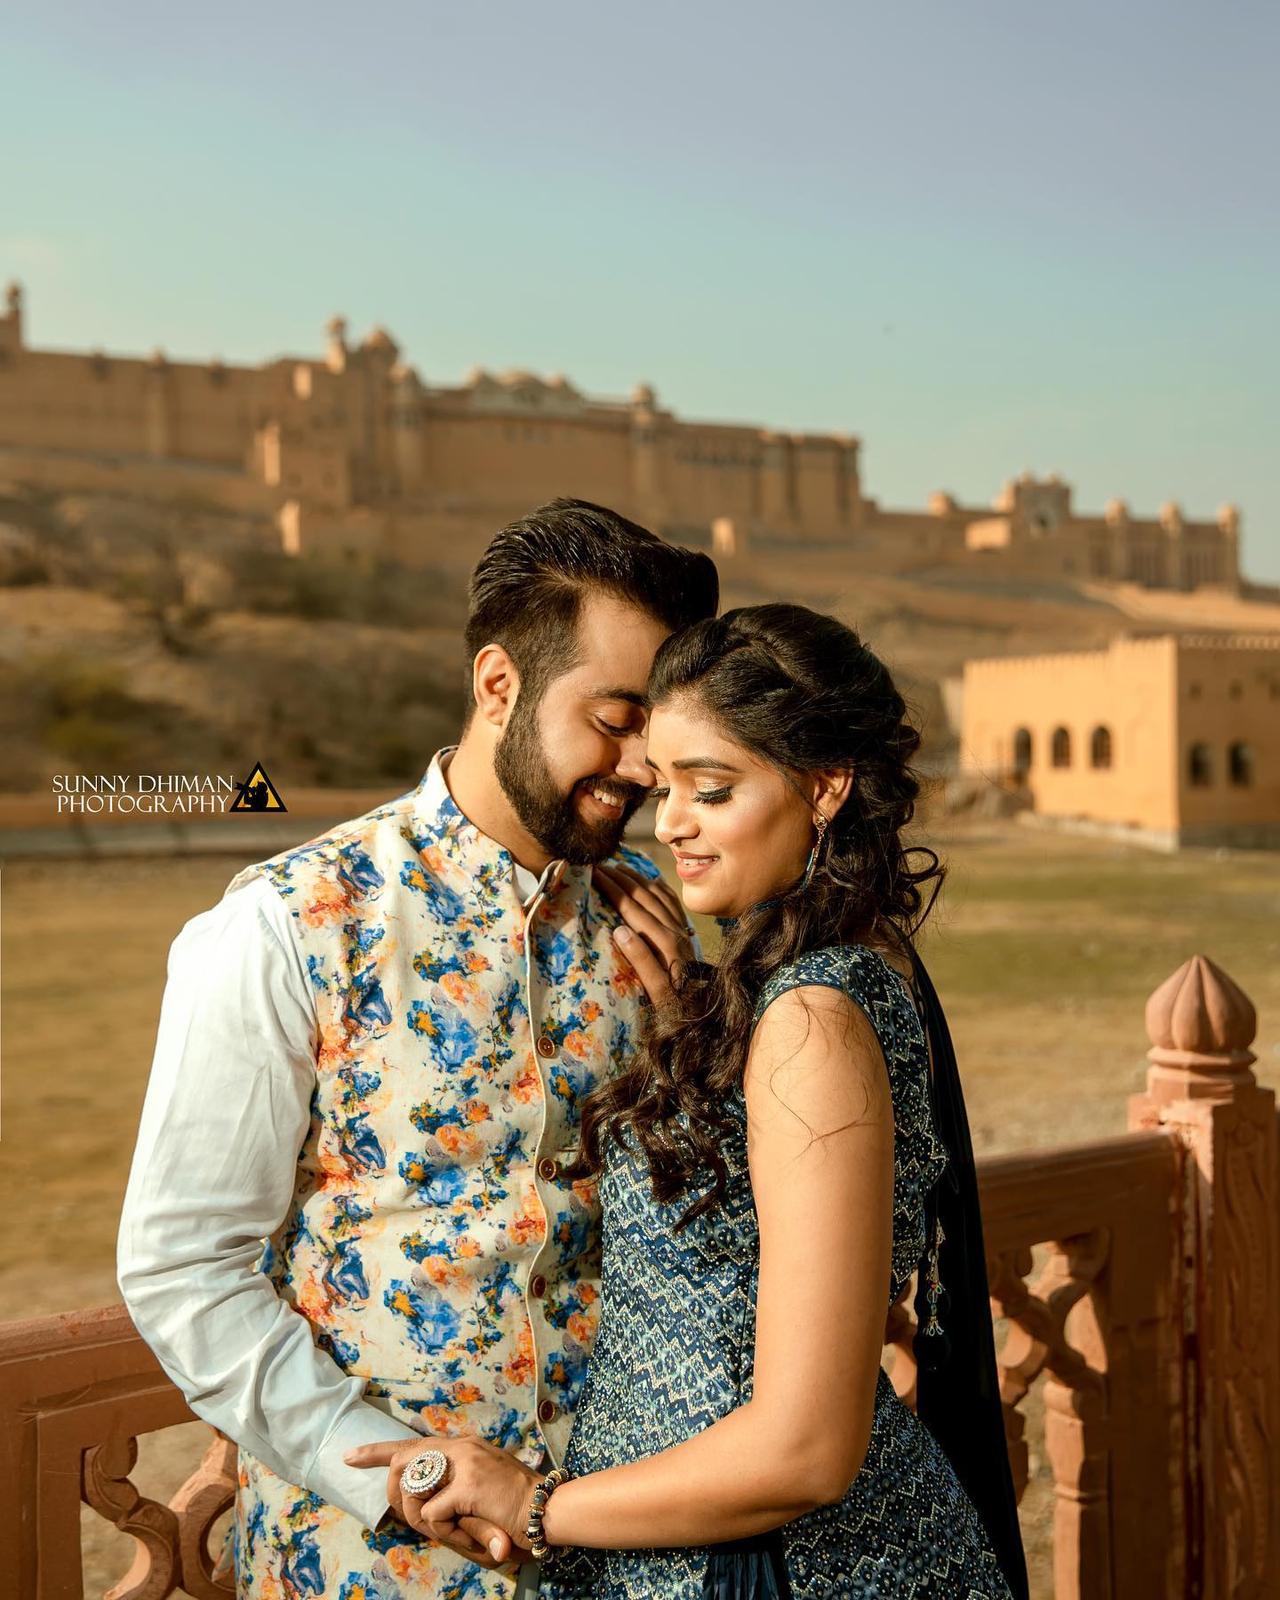 https://cdn0.weddingwire.in/article/5462/original/1280/jpg/62645-cute-couple-images-sunny-dhiman-photography-when-we-felt-butterflies-in-the-stomach.jpeg